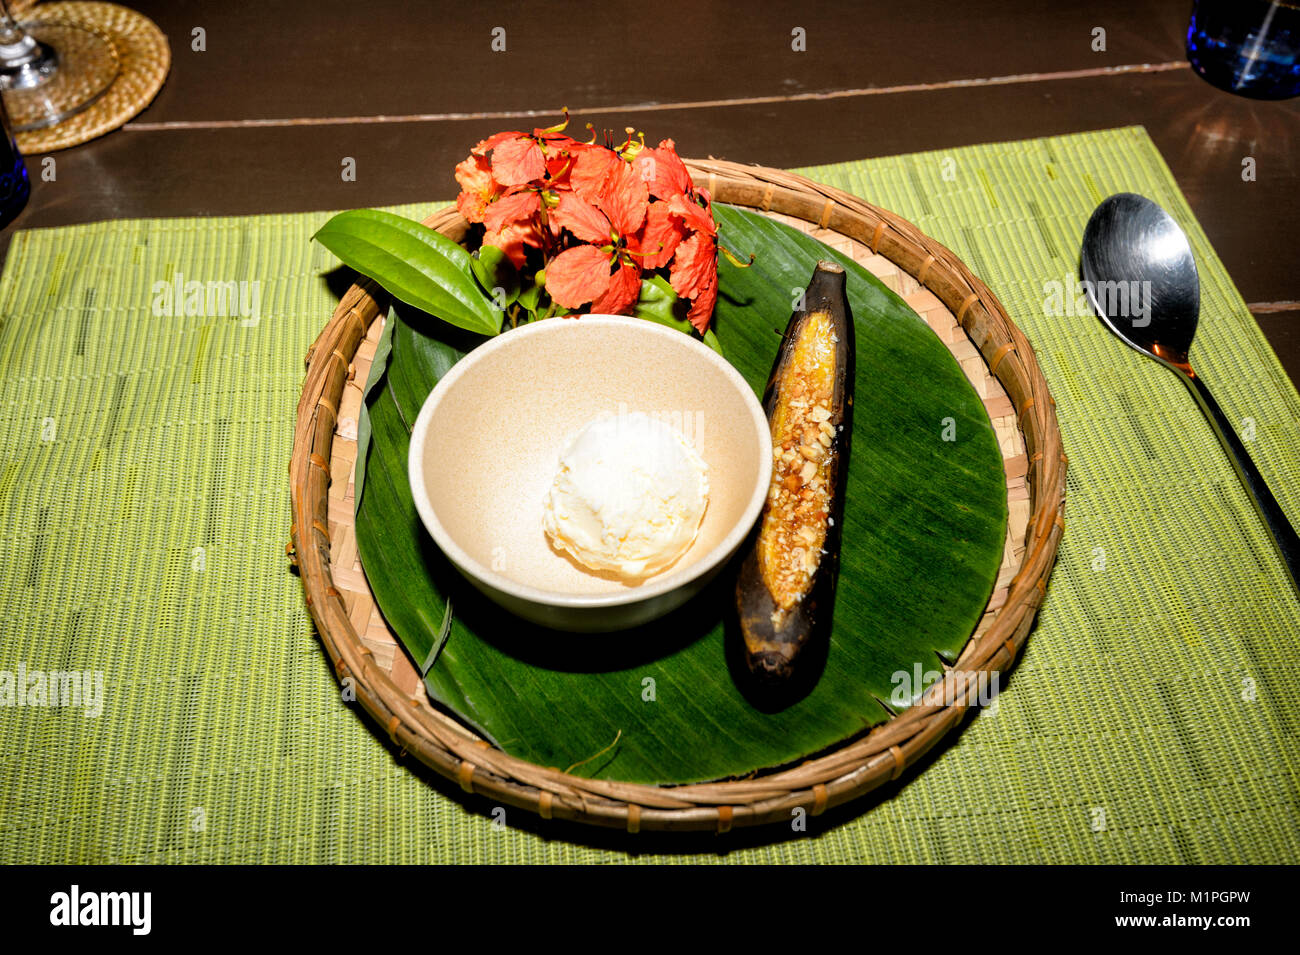 Dessert of icecream, baked banana with caramel and almonds, on a tray decorated with red hibiscus flowers, Sabah, Borneo, Malaysia Stock Photo